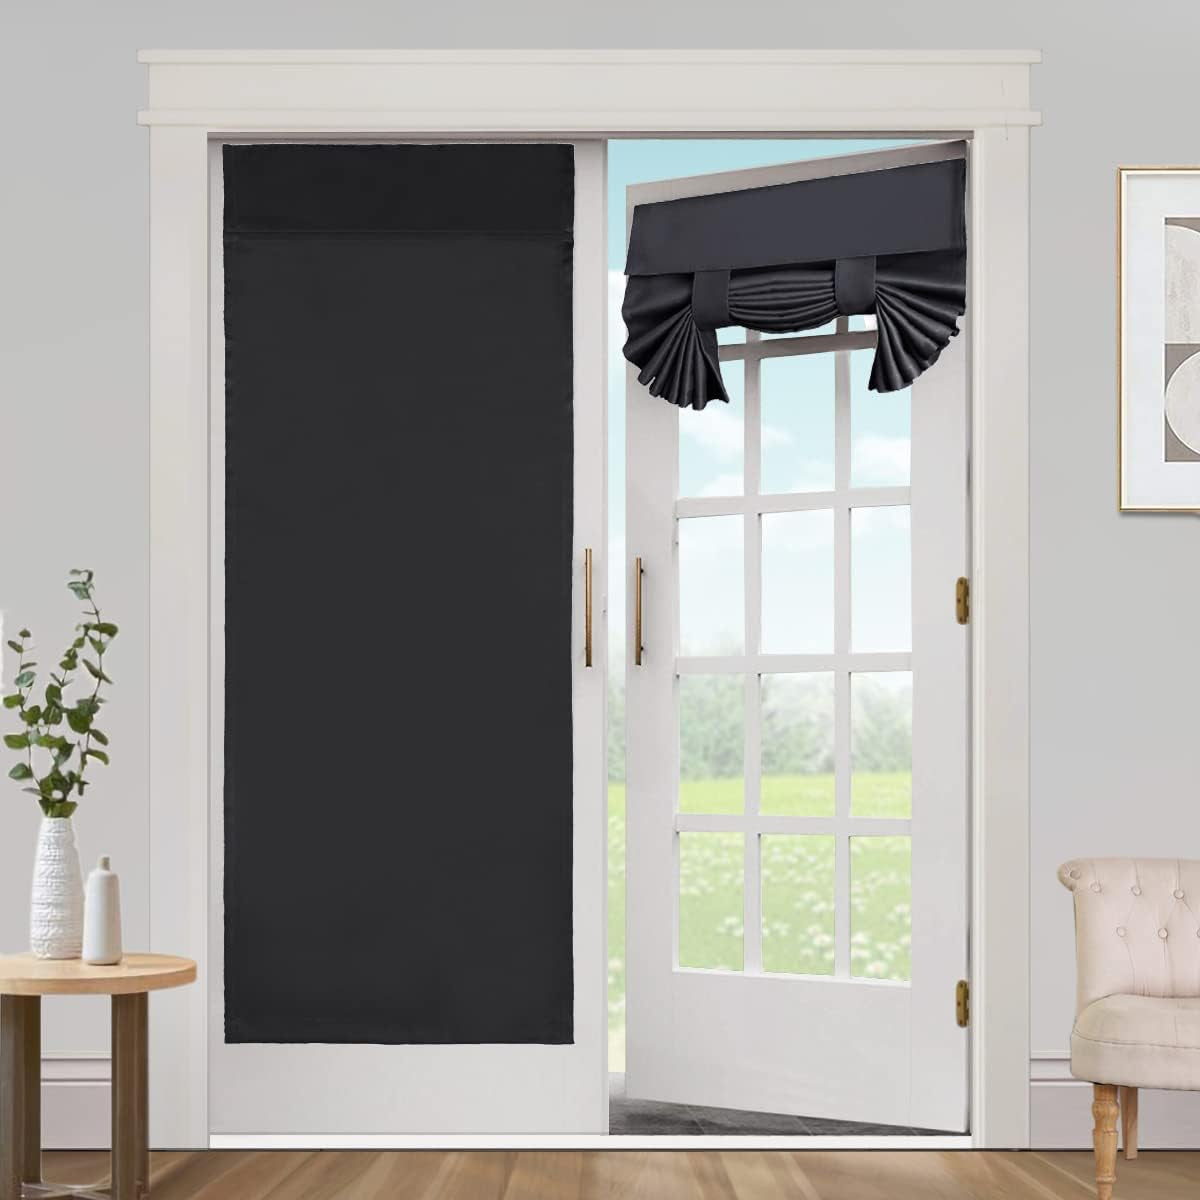 Blackout Curtains for French Doors - Thermal Insulated Tricia Door Window Curtain for Patio Door, Self Stick Tie up Shade Energy Efficient Double Door Blind, 26 X 68 Inches, 1 Panel, Sage  L.VICTEX Black 2 